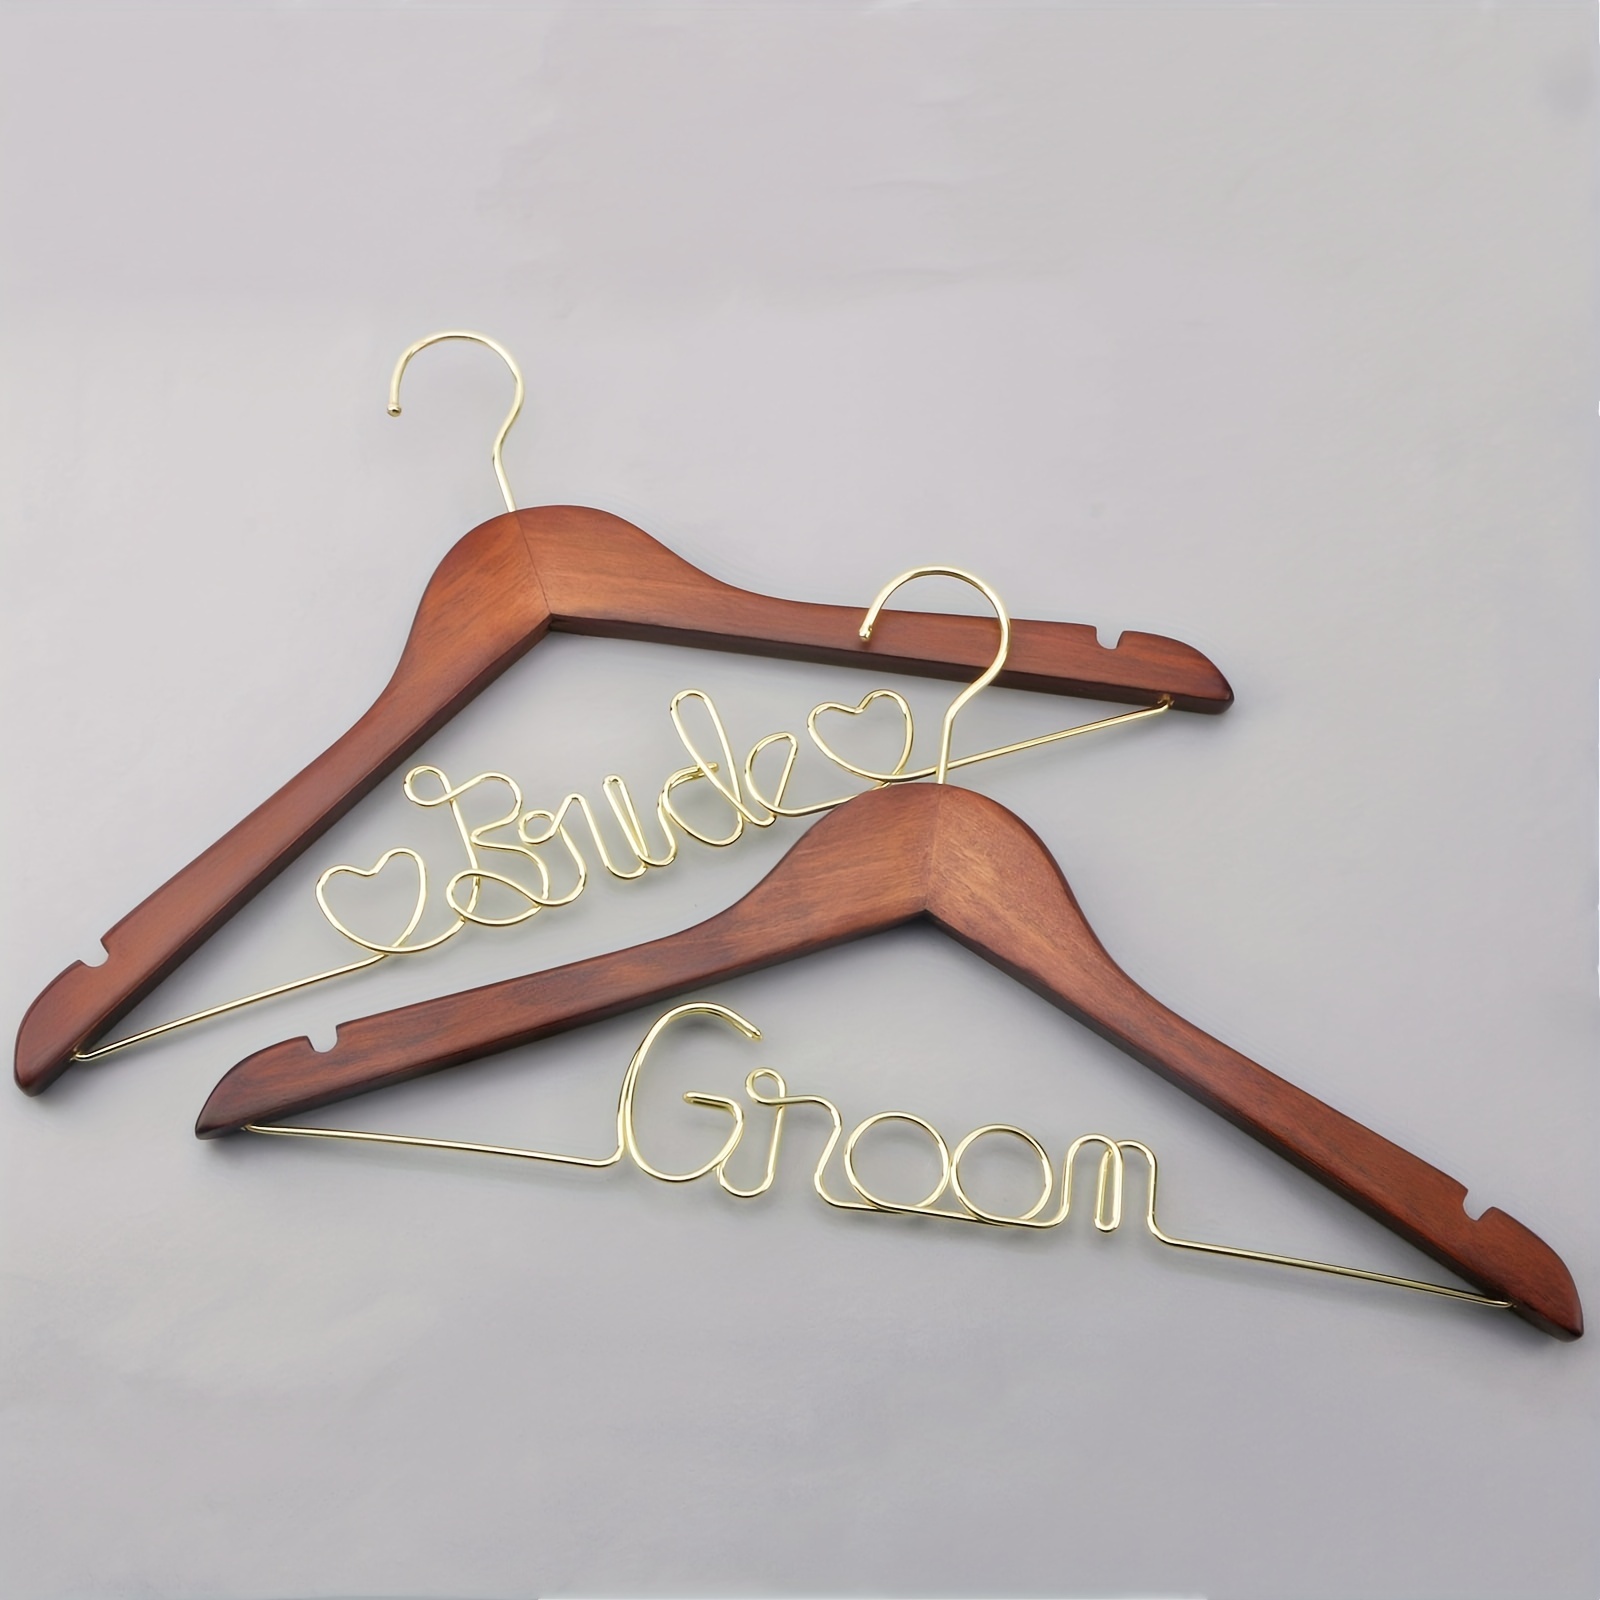 

1pc Wooden Hangers With Gold Script, "bride & Groom", Classic Thickened Wood Suit Hangers, Broad Shoulder, No Marks, Perfect For Wedding Dresses & Suits, Ideal Wedding Supplies